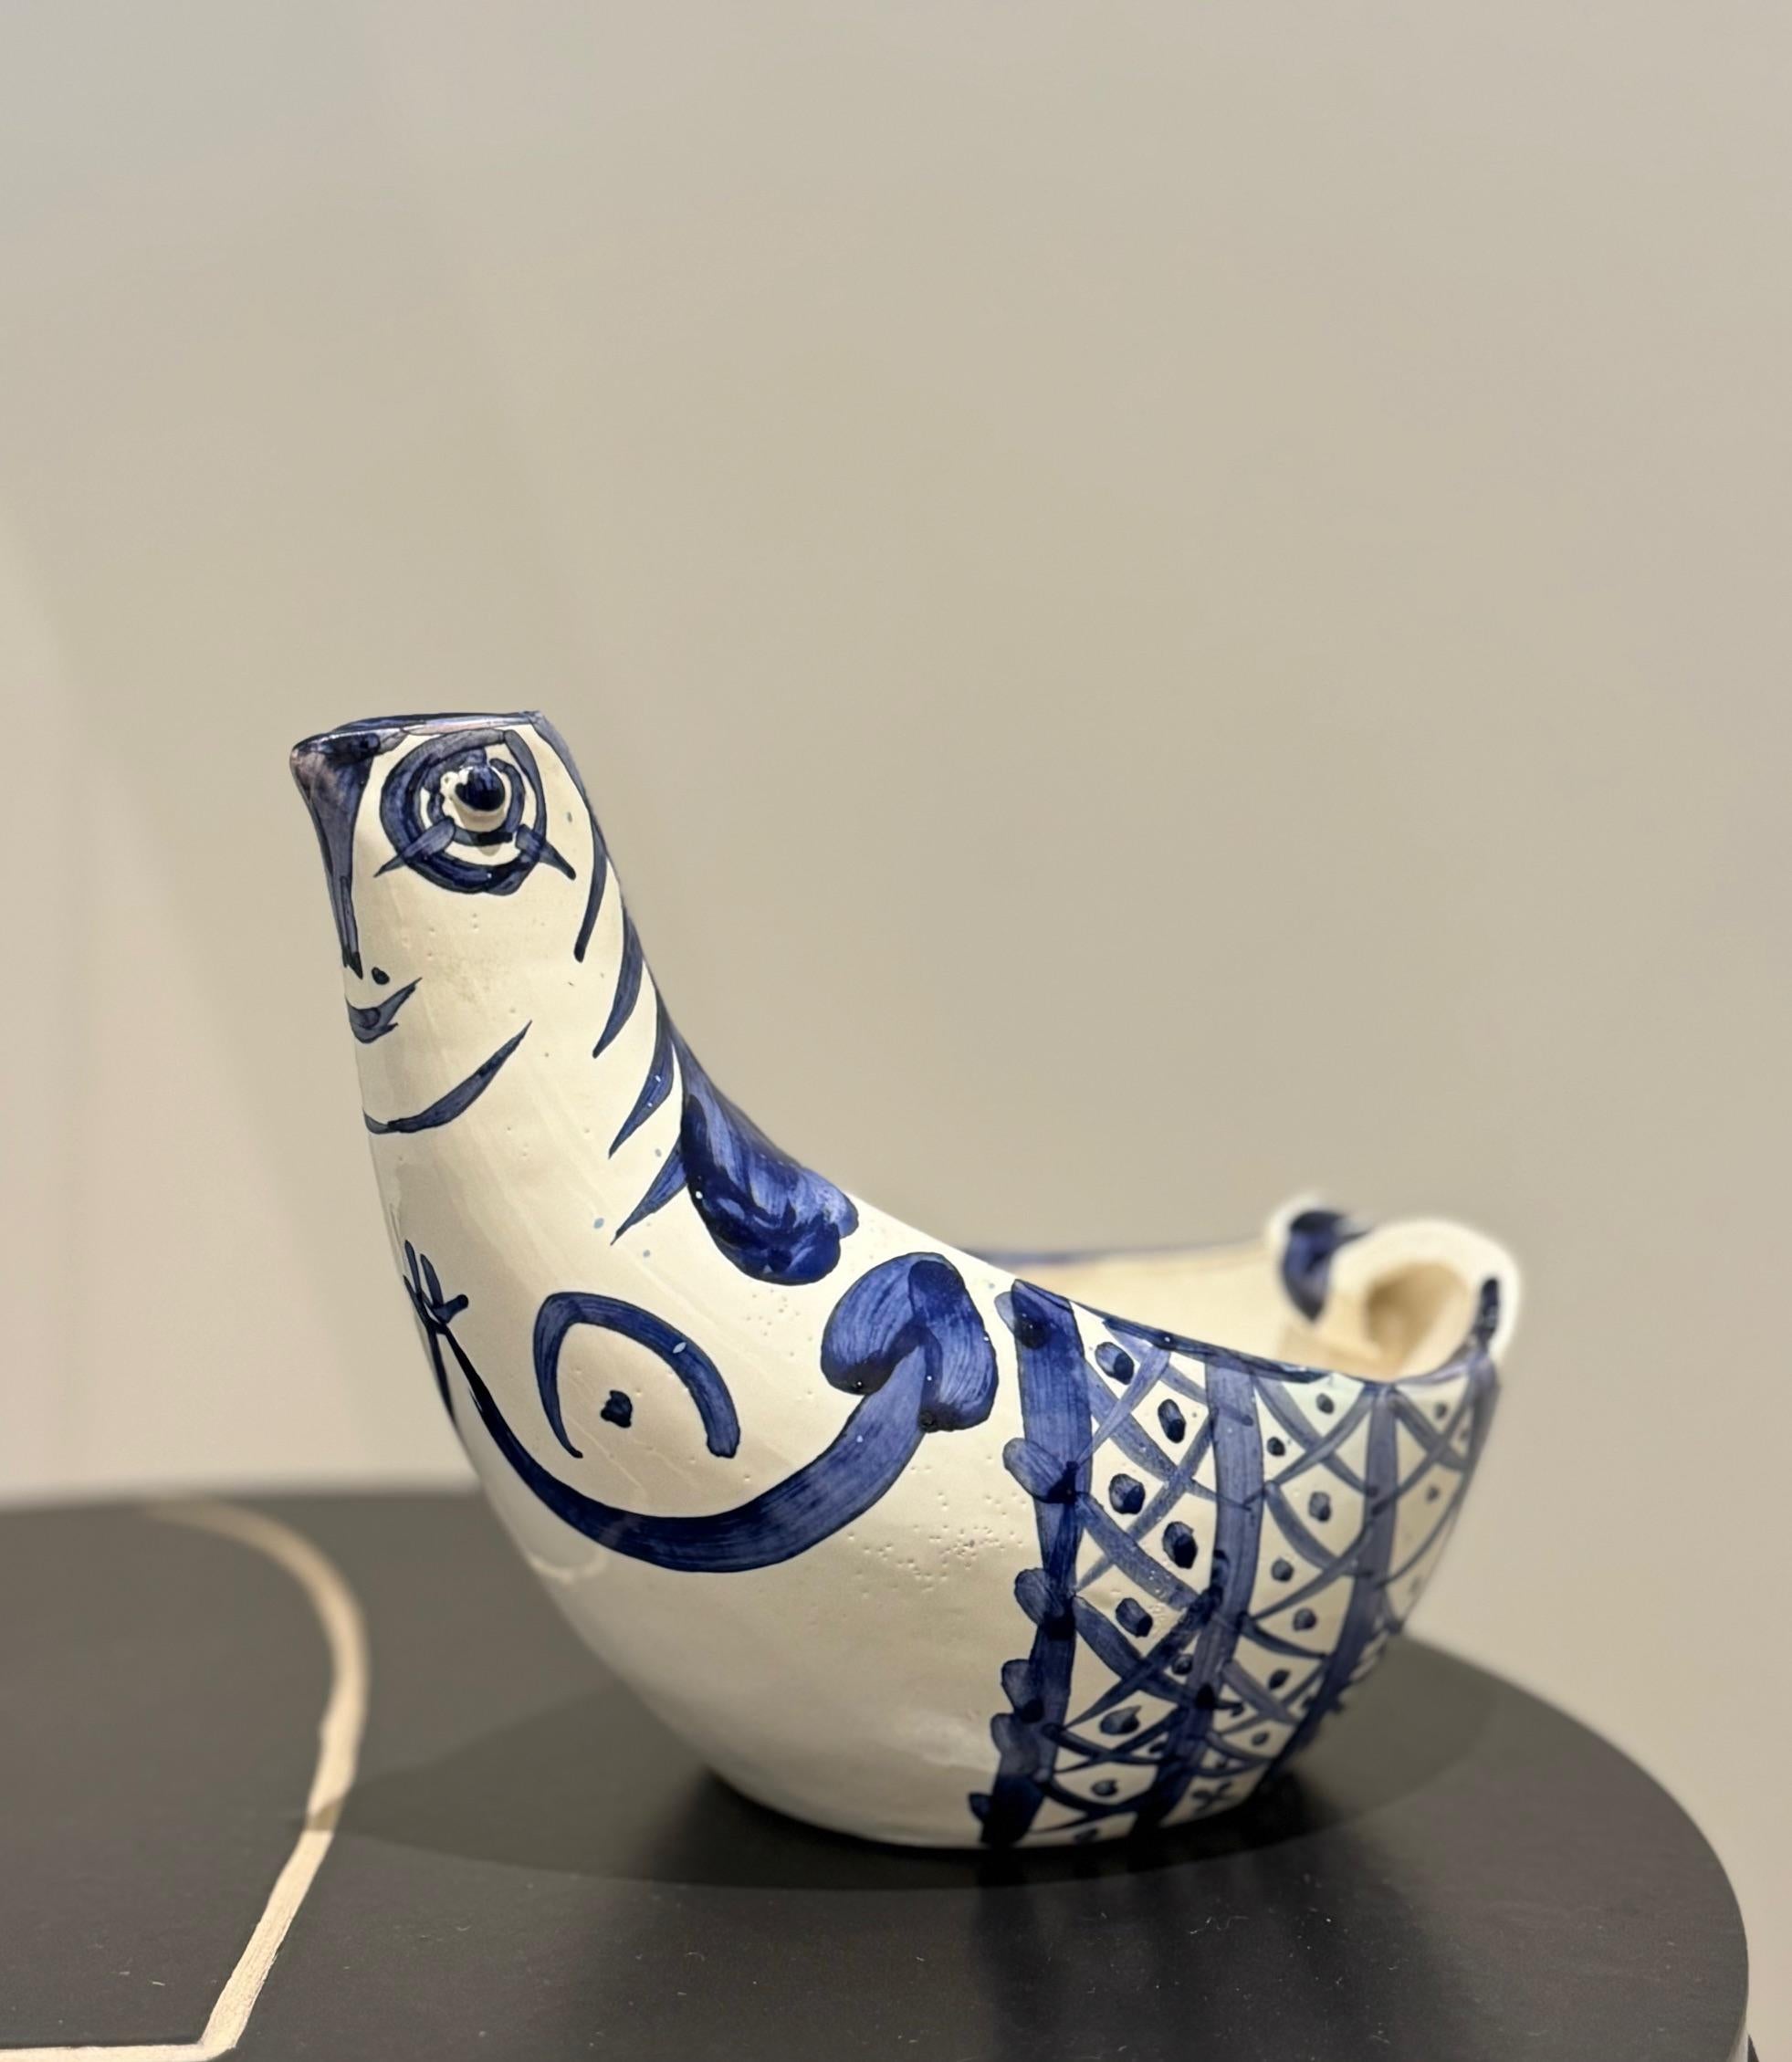 Picasso ( 1881-1973 ) 
Hen subject - 1954 (AR # 250)
Turned shape piece , glazed earthenware clay with white & blue enamel , from an edition of 500,  stamped 